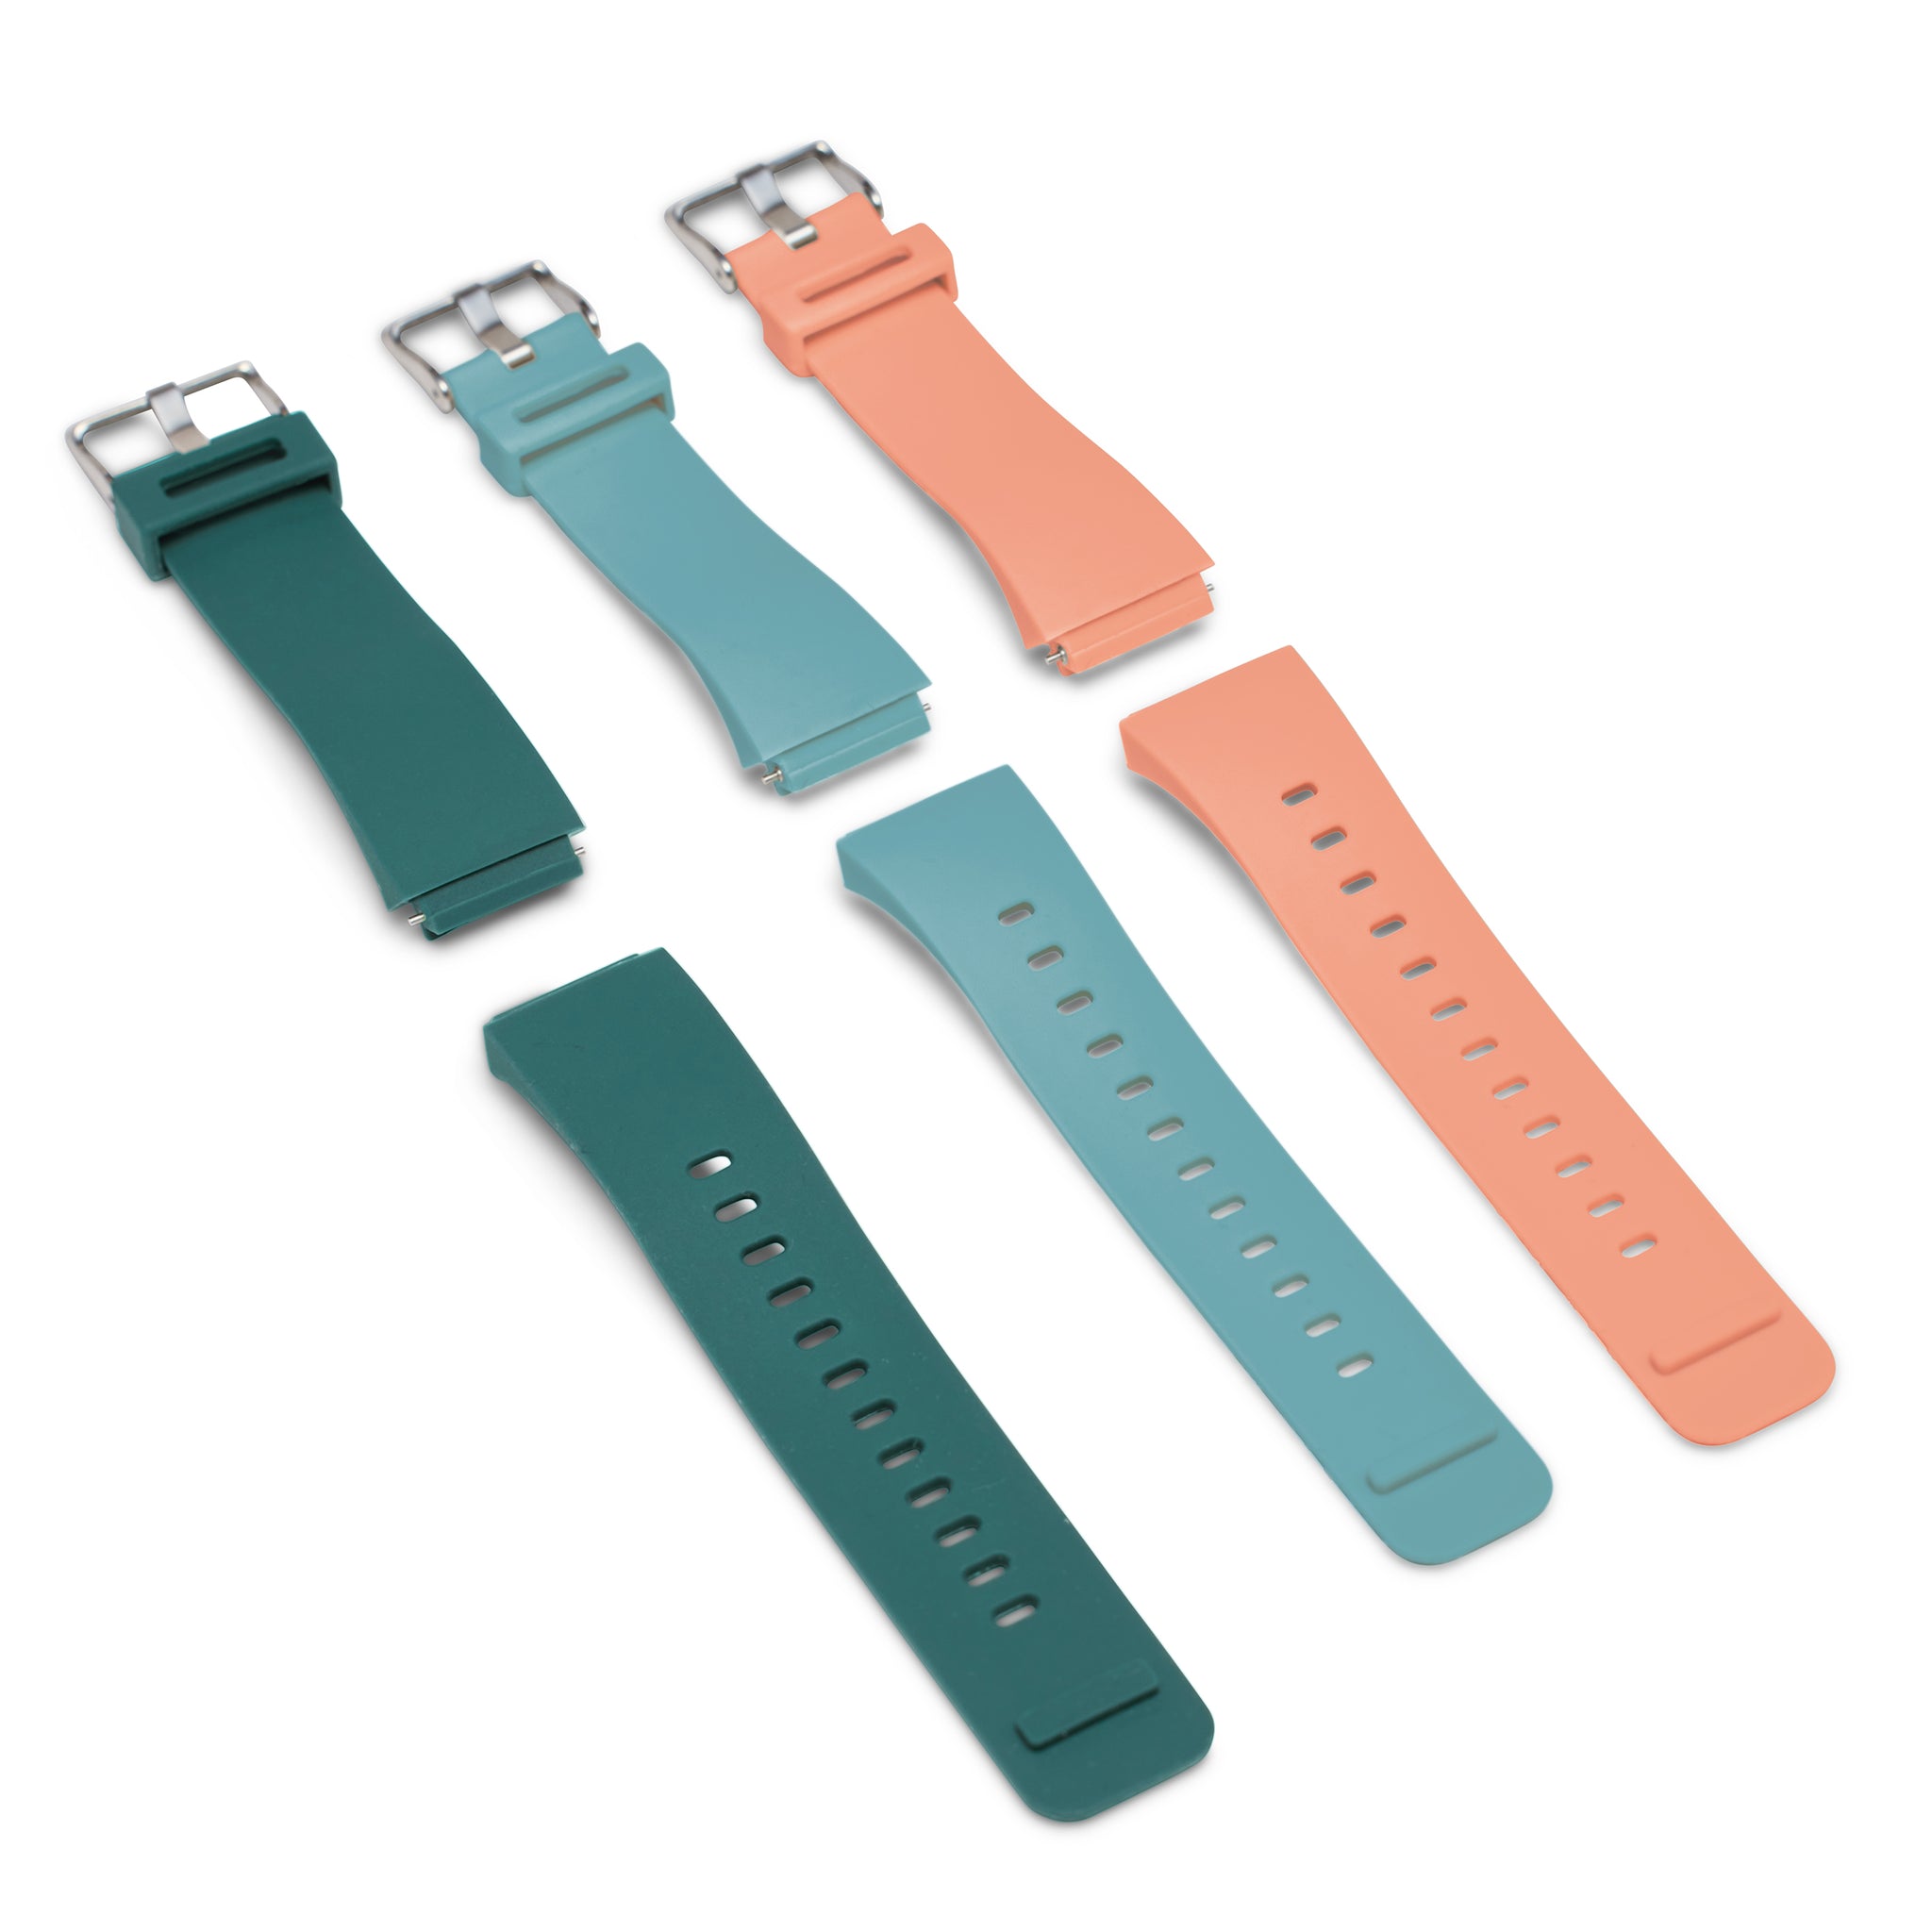 Three Timer Watch bands are displayed. The first is the watch band in the large size in the Baltic Blue color. The second is in the Small size in the Caribbean Blue color. The third is also in the small size in the Sedona Orange color. 